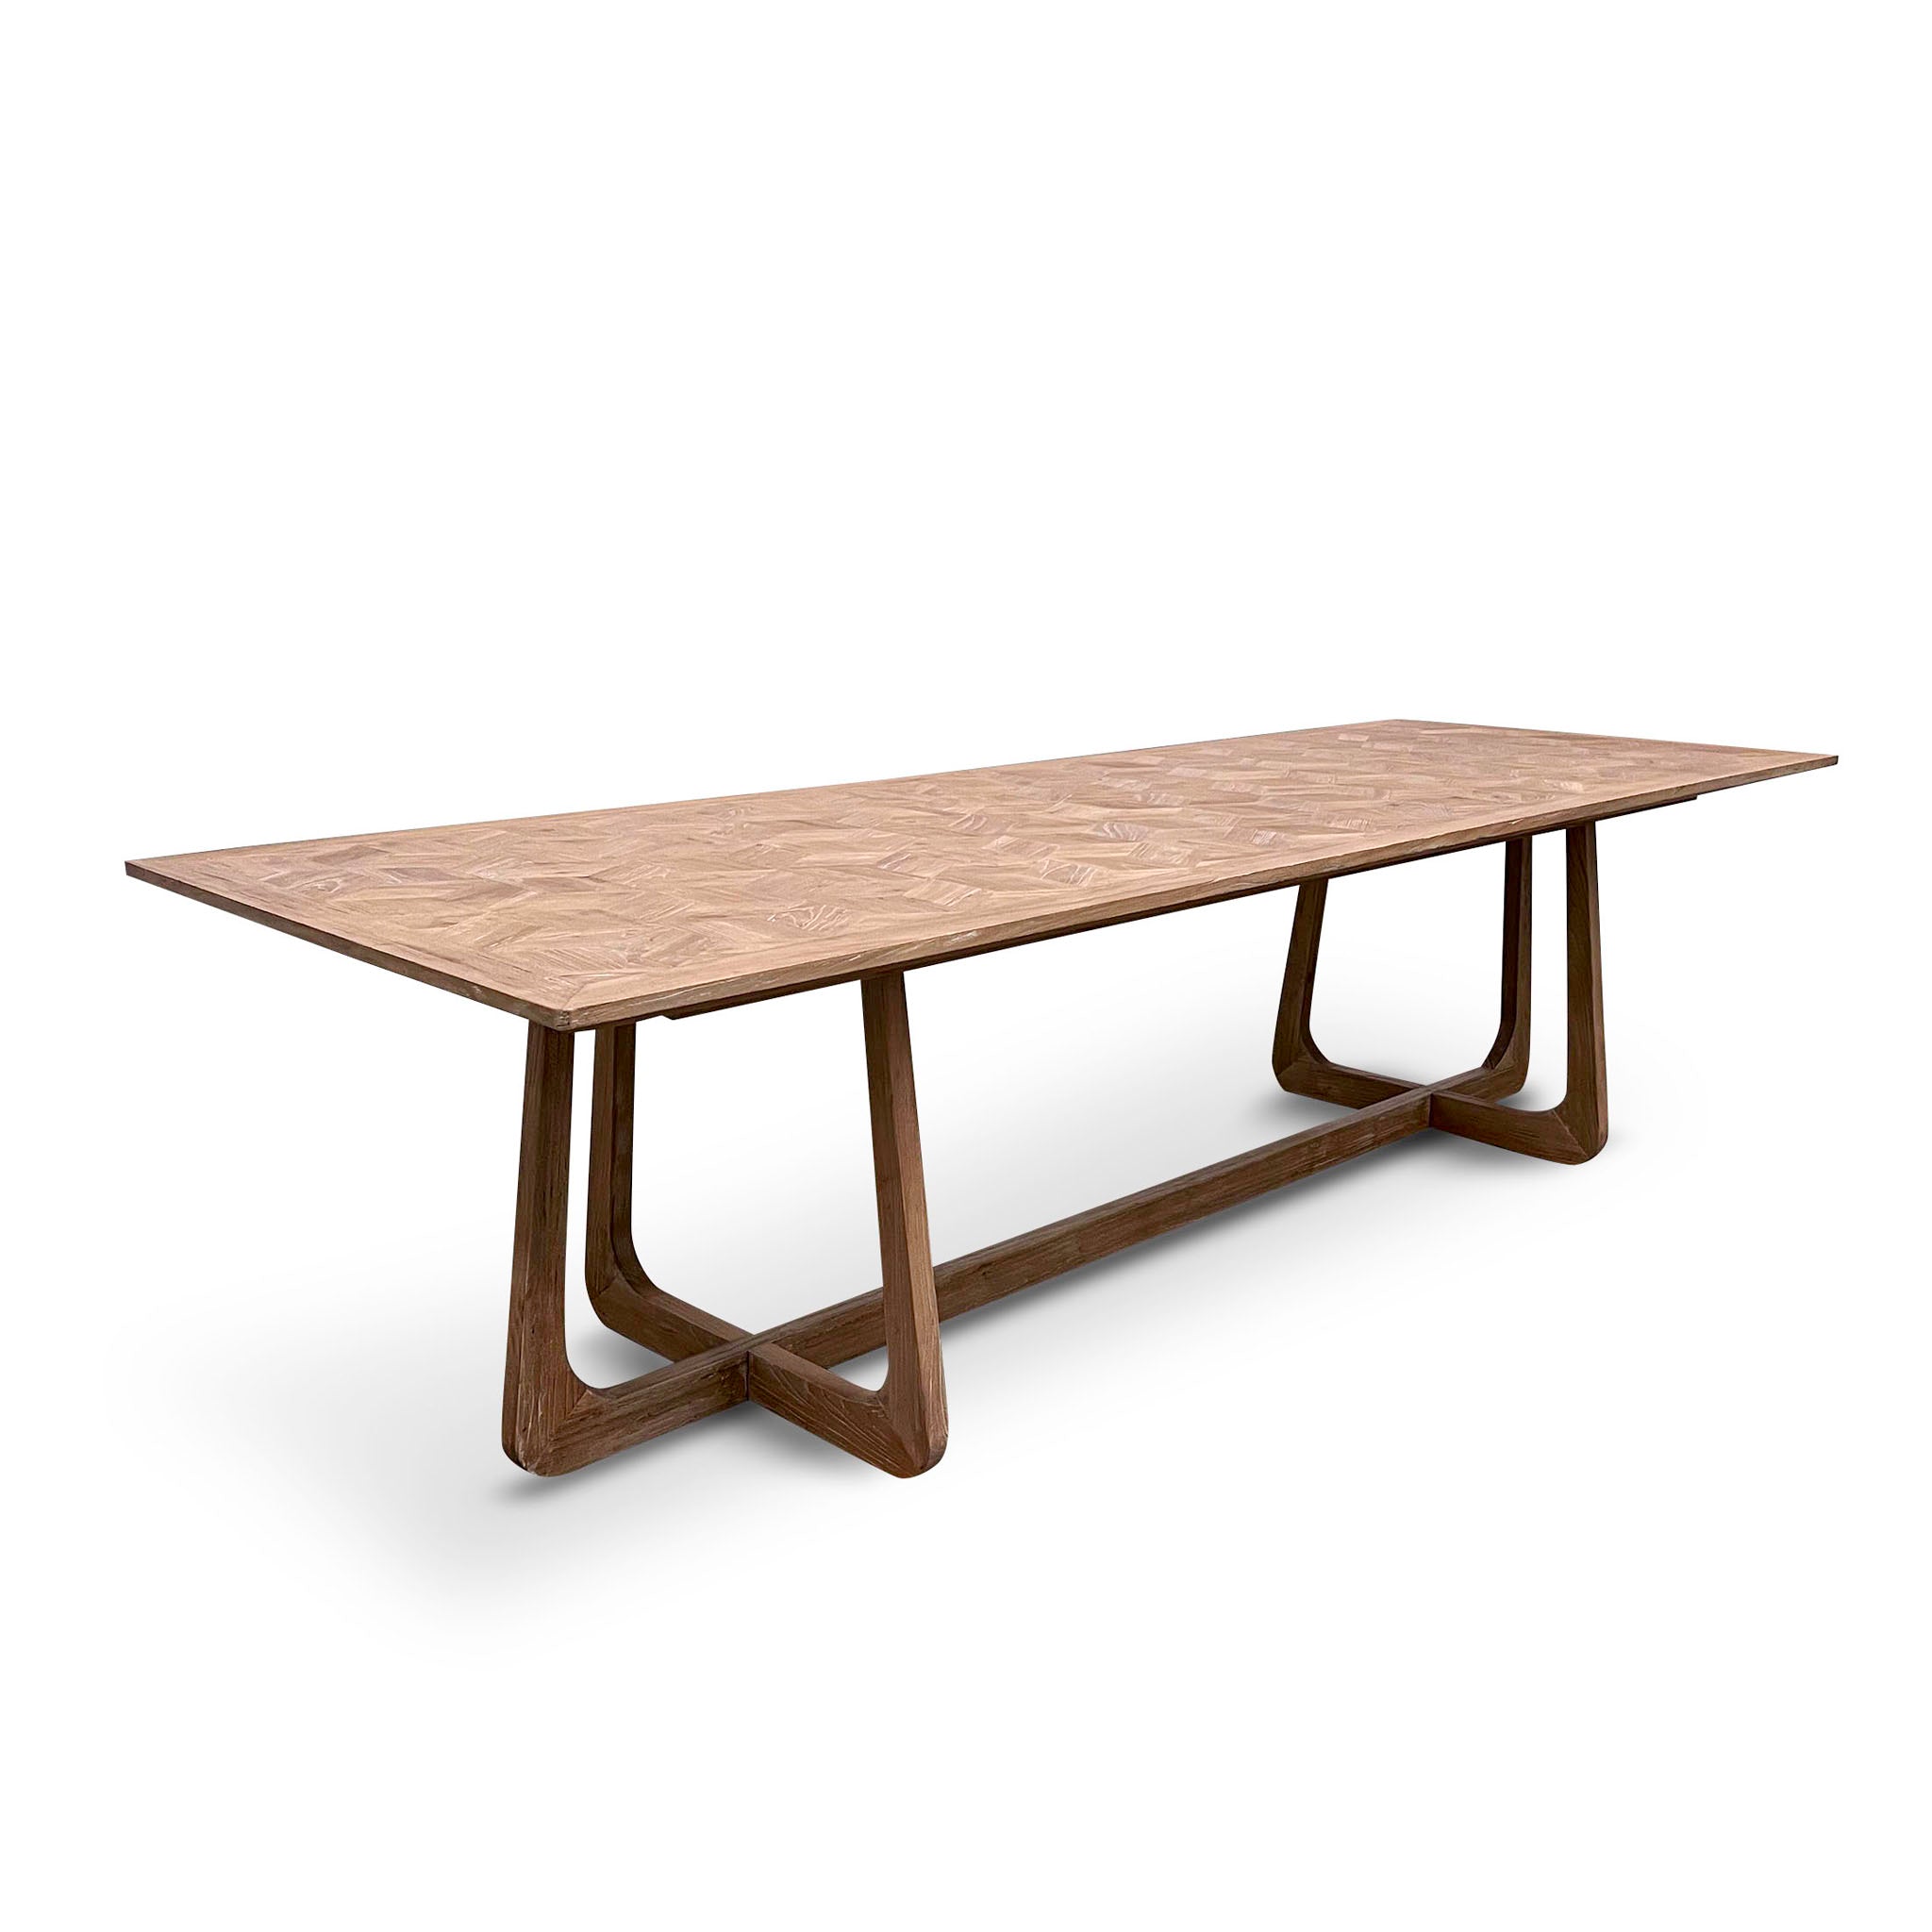 Oak Dining Table – Natural 3m